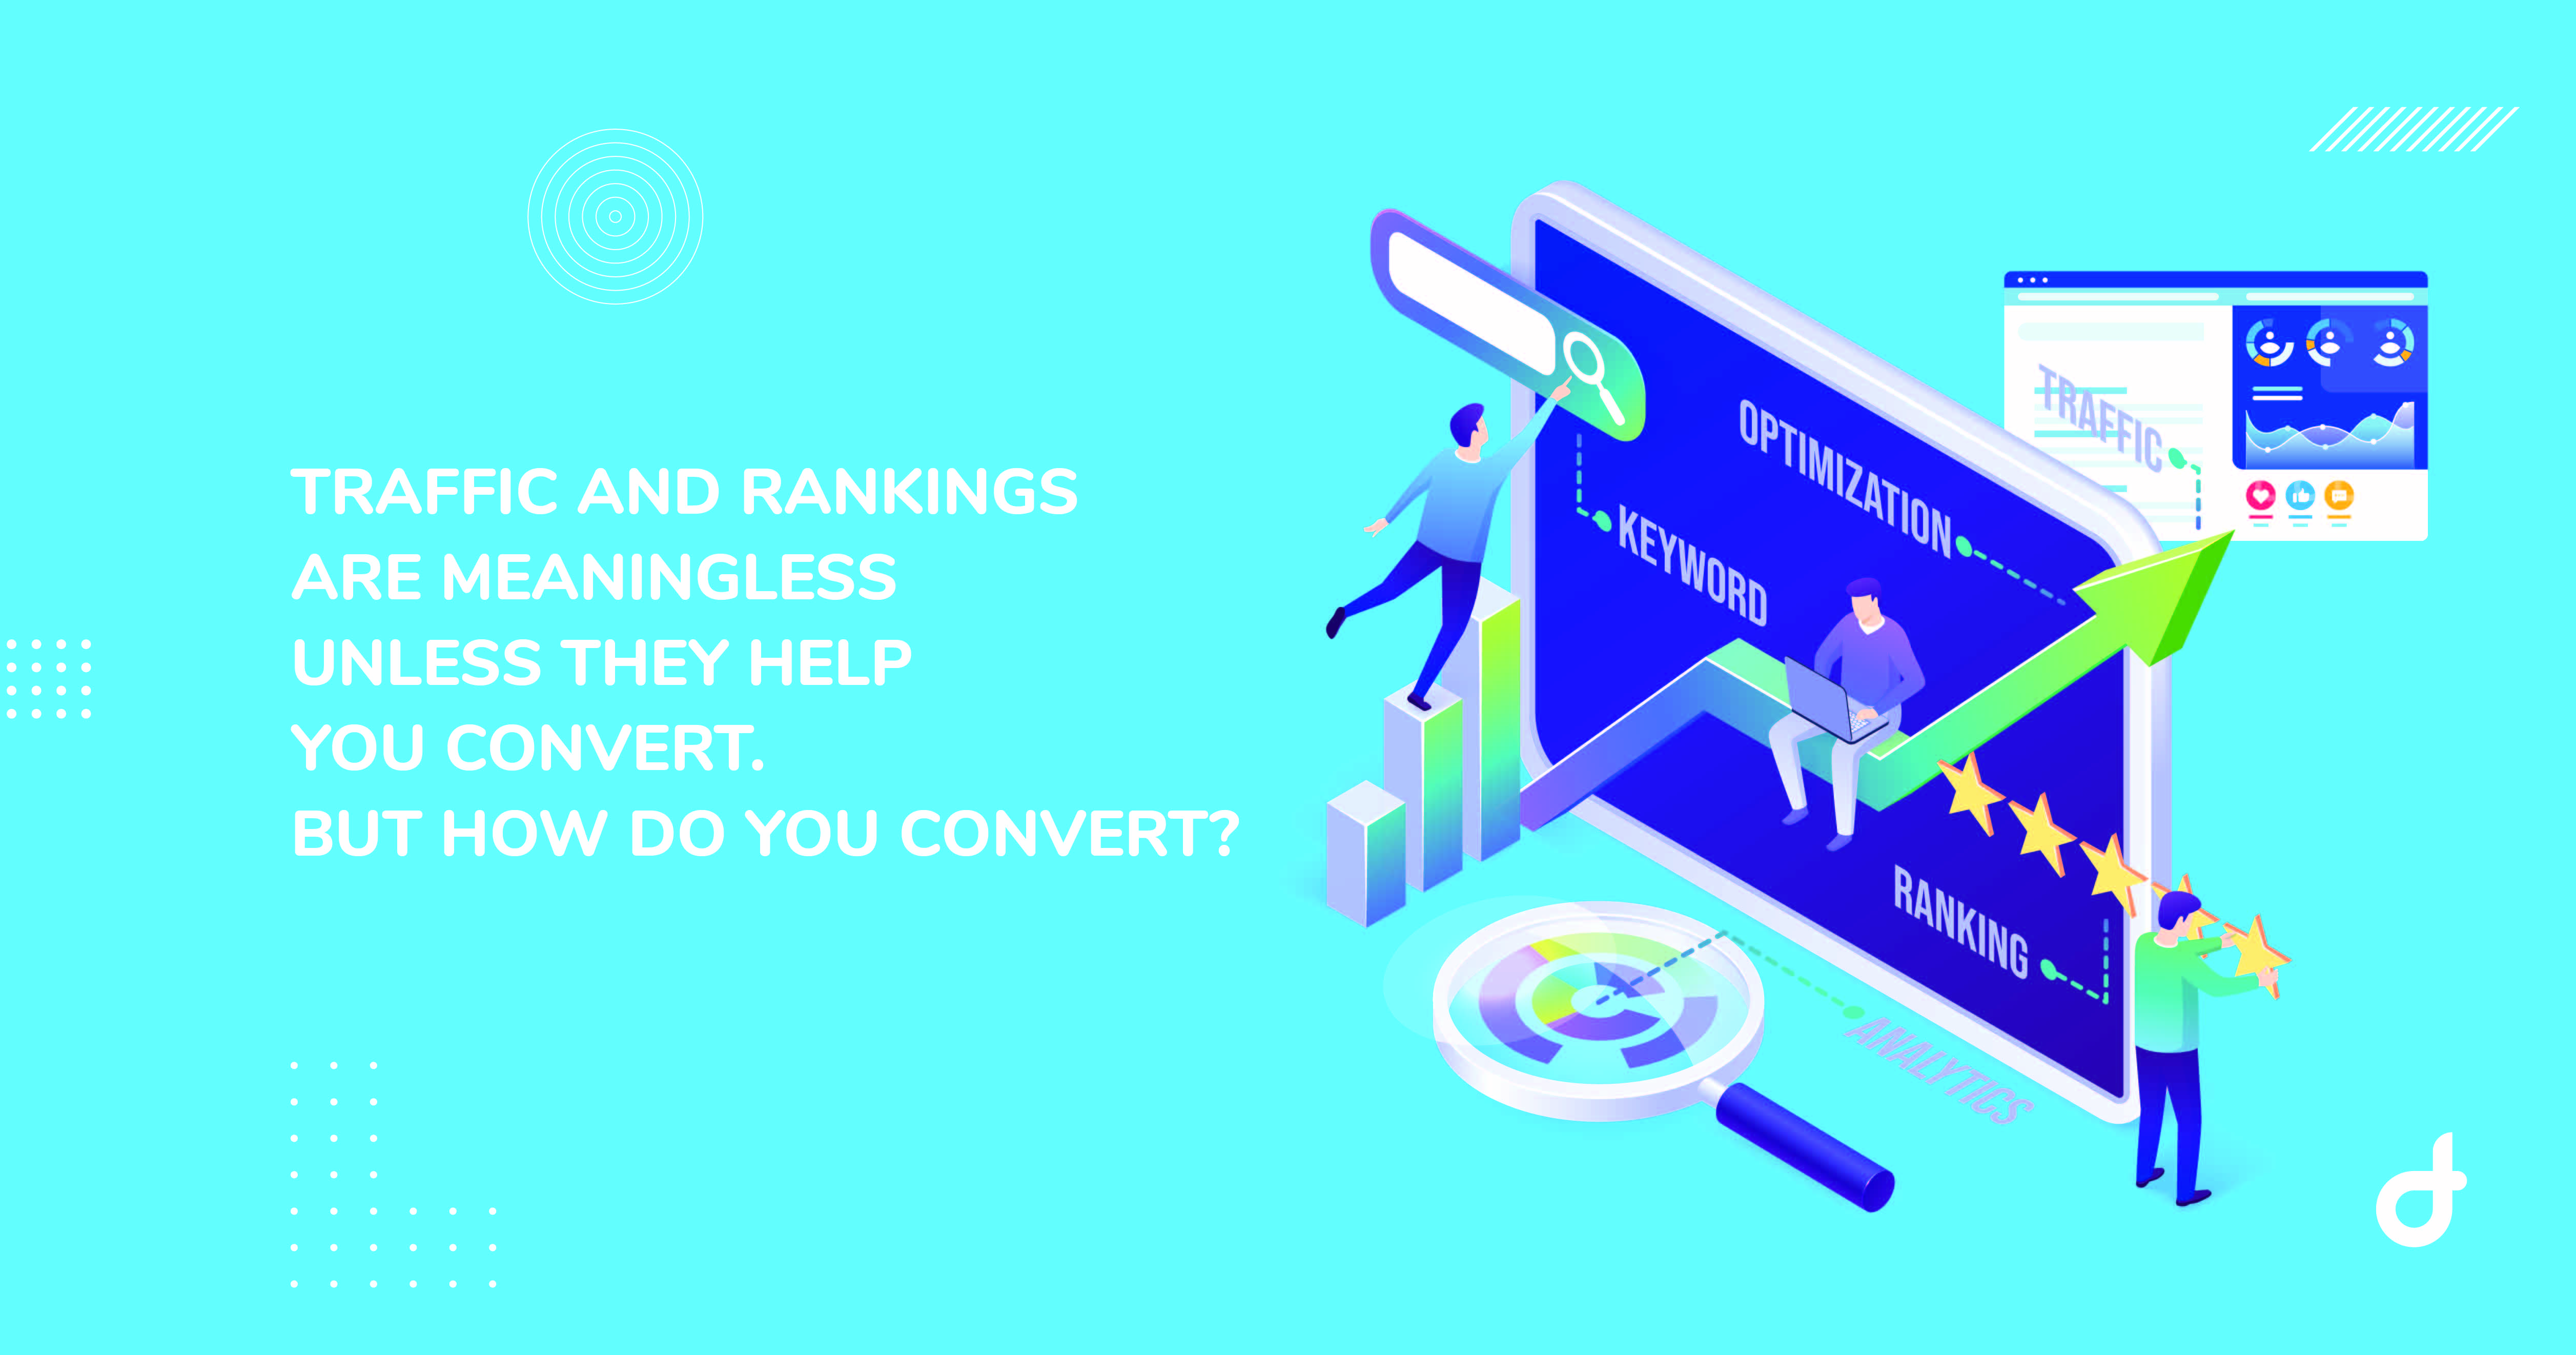 Traffic and rankings are meaningless unless they help you convert. But how do you convert?